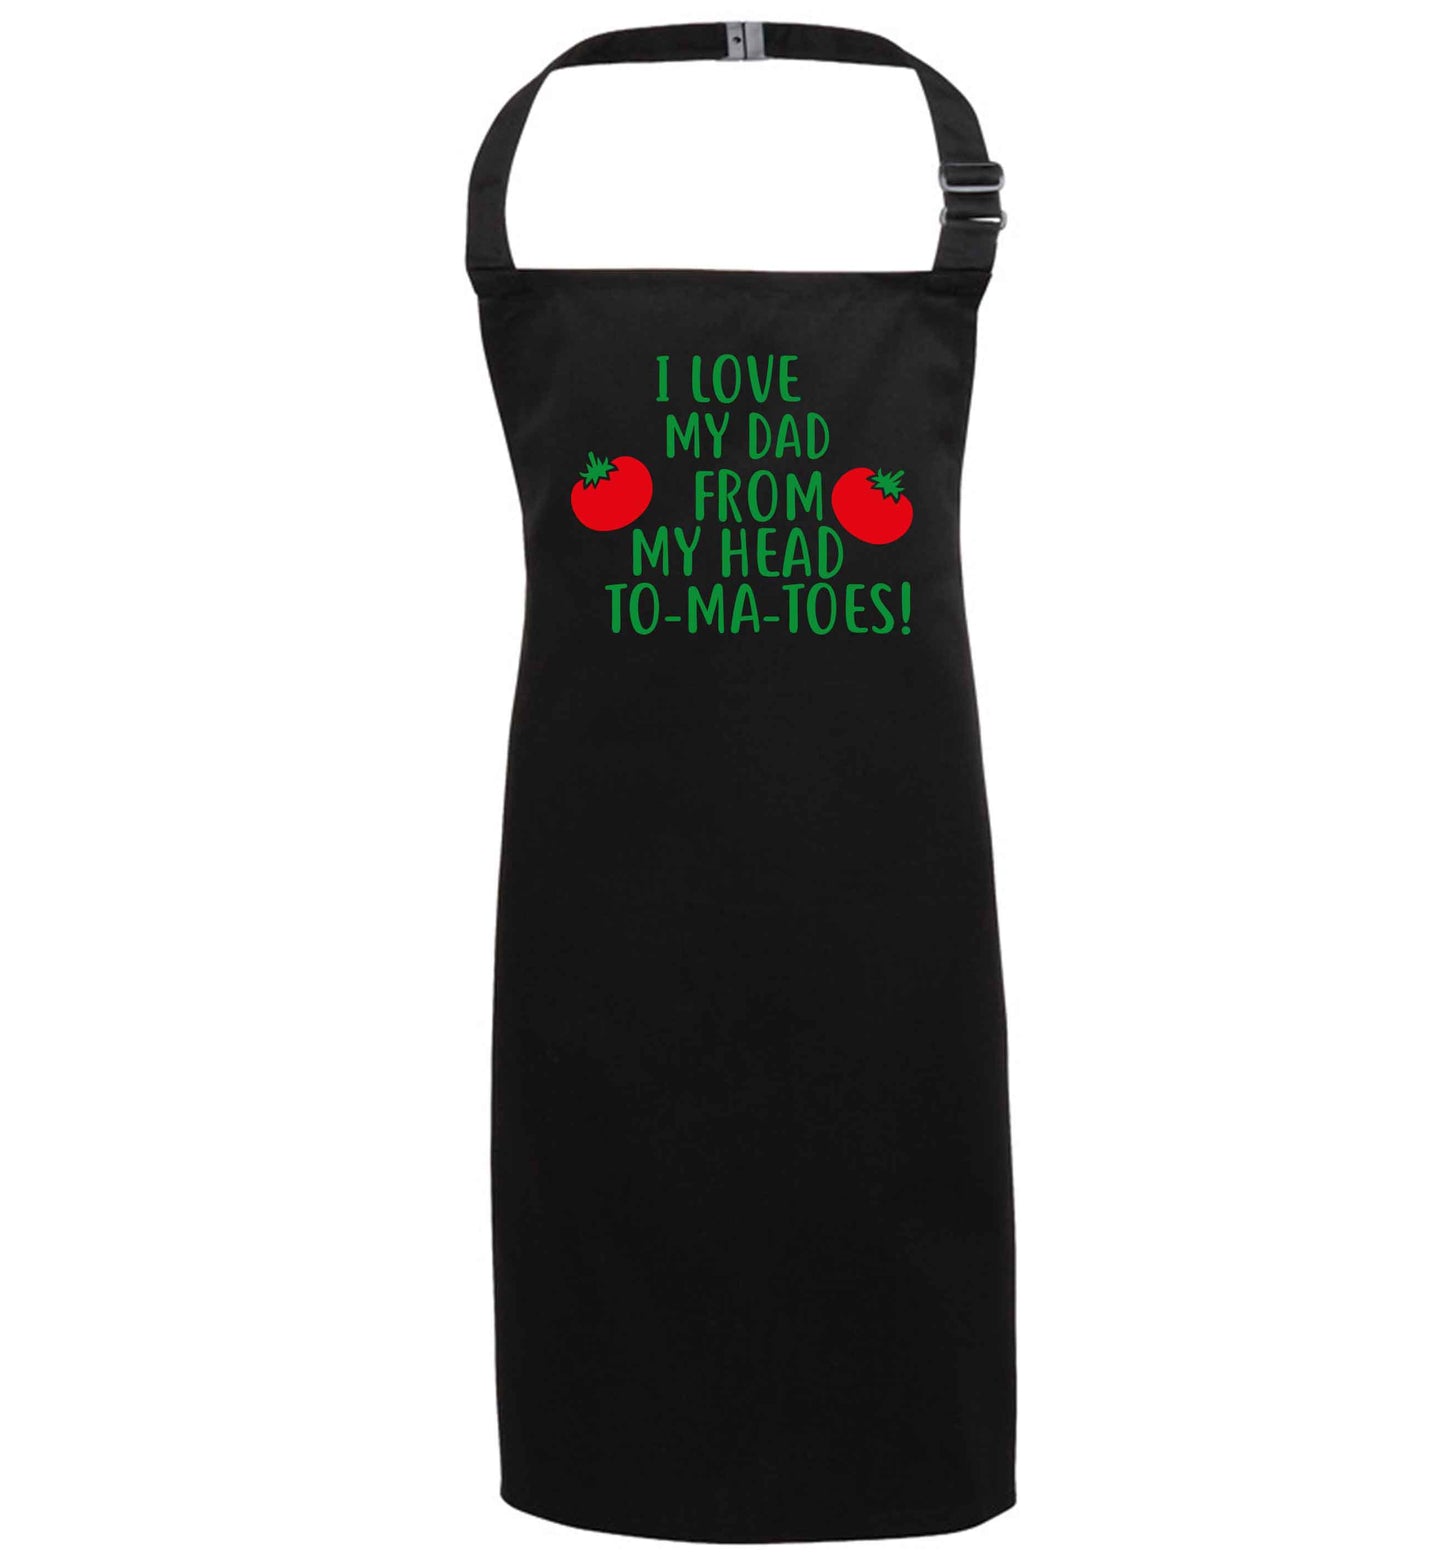 I love my dad from my head to-ma-toes black apron 7-10 years